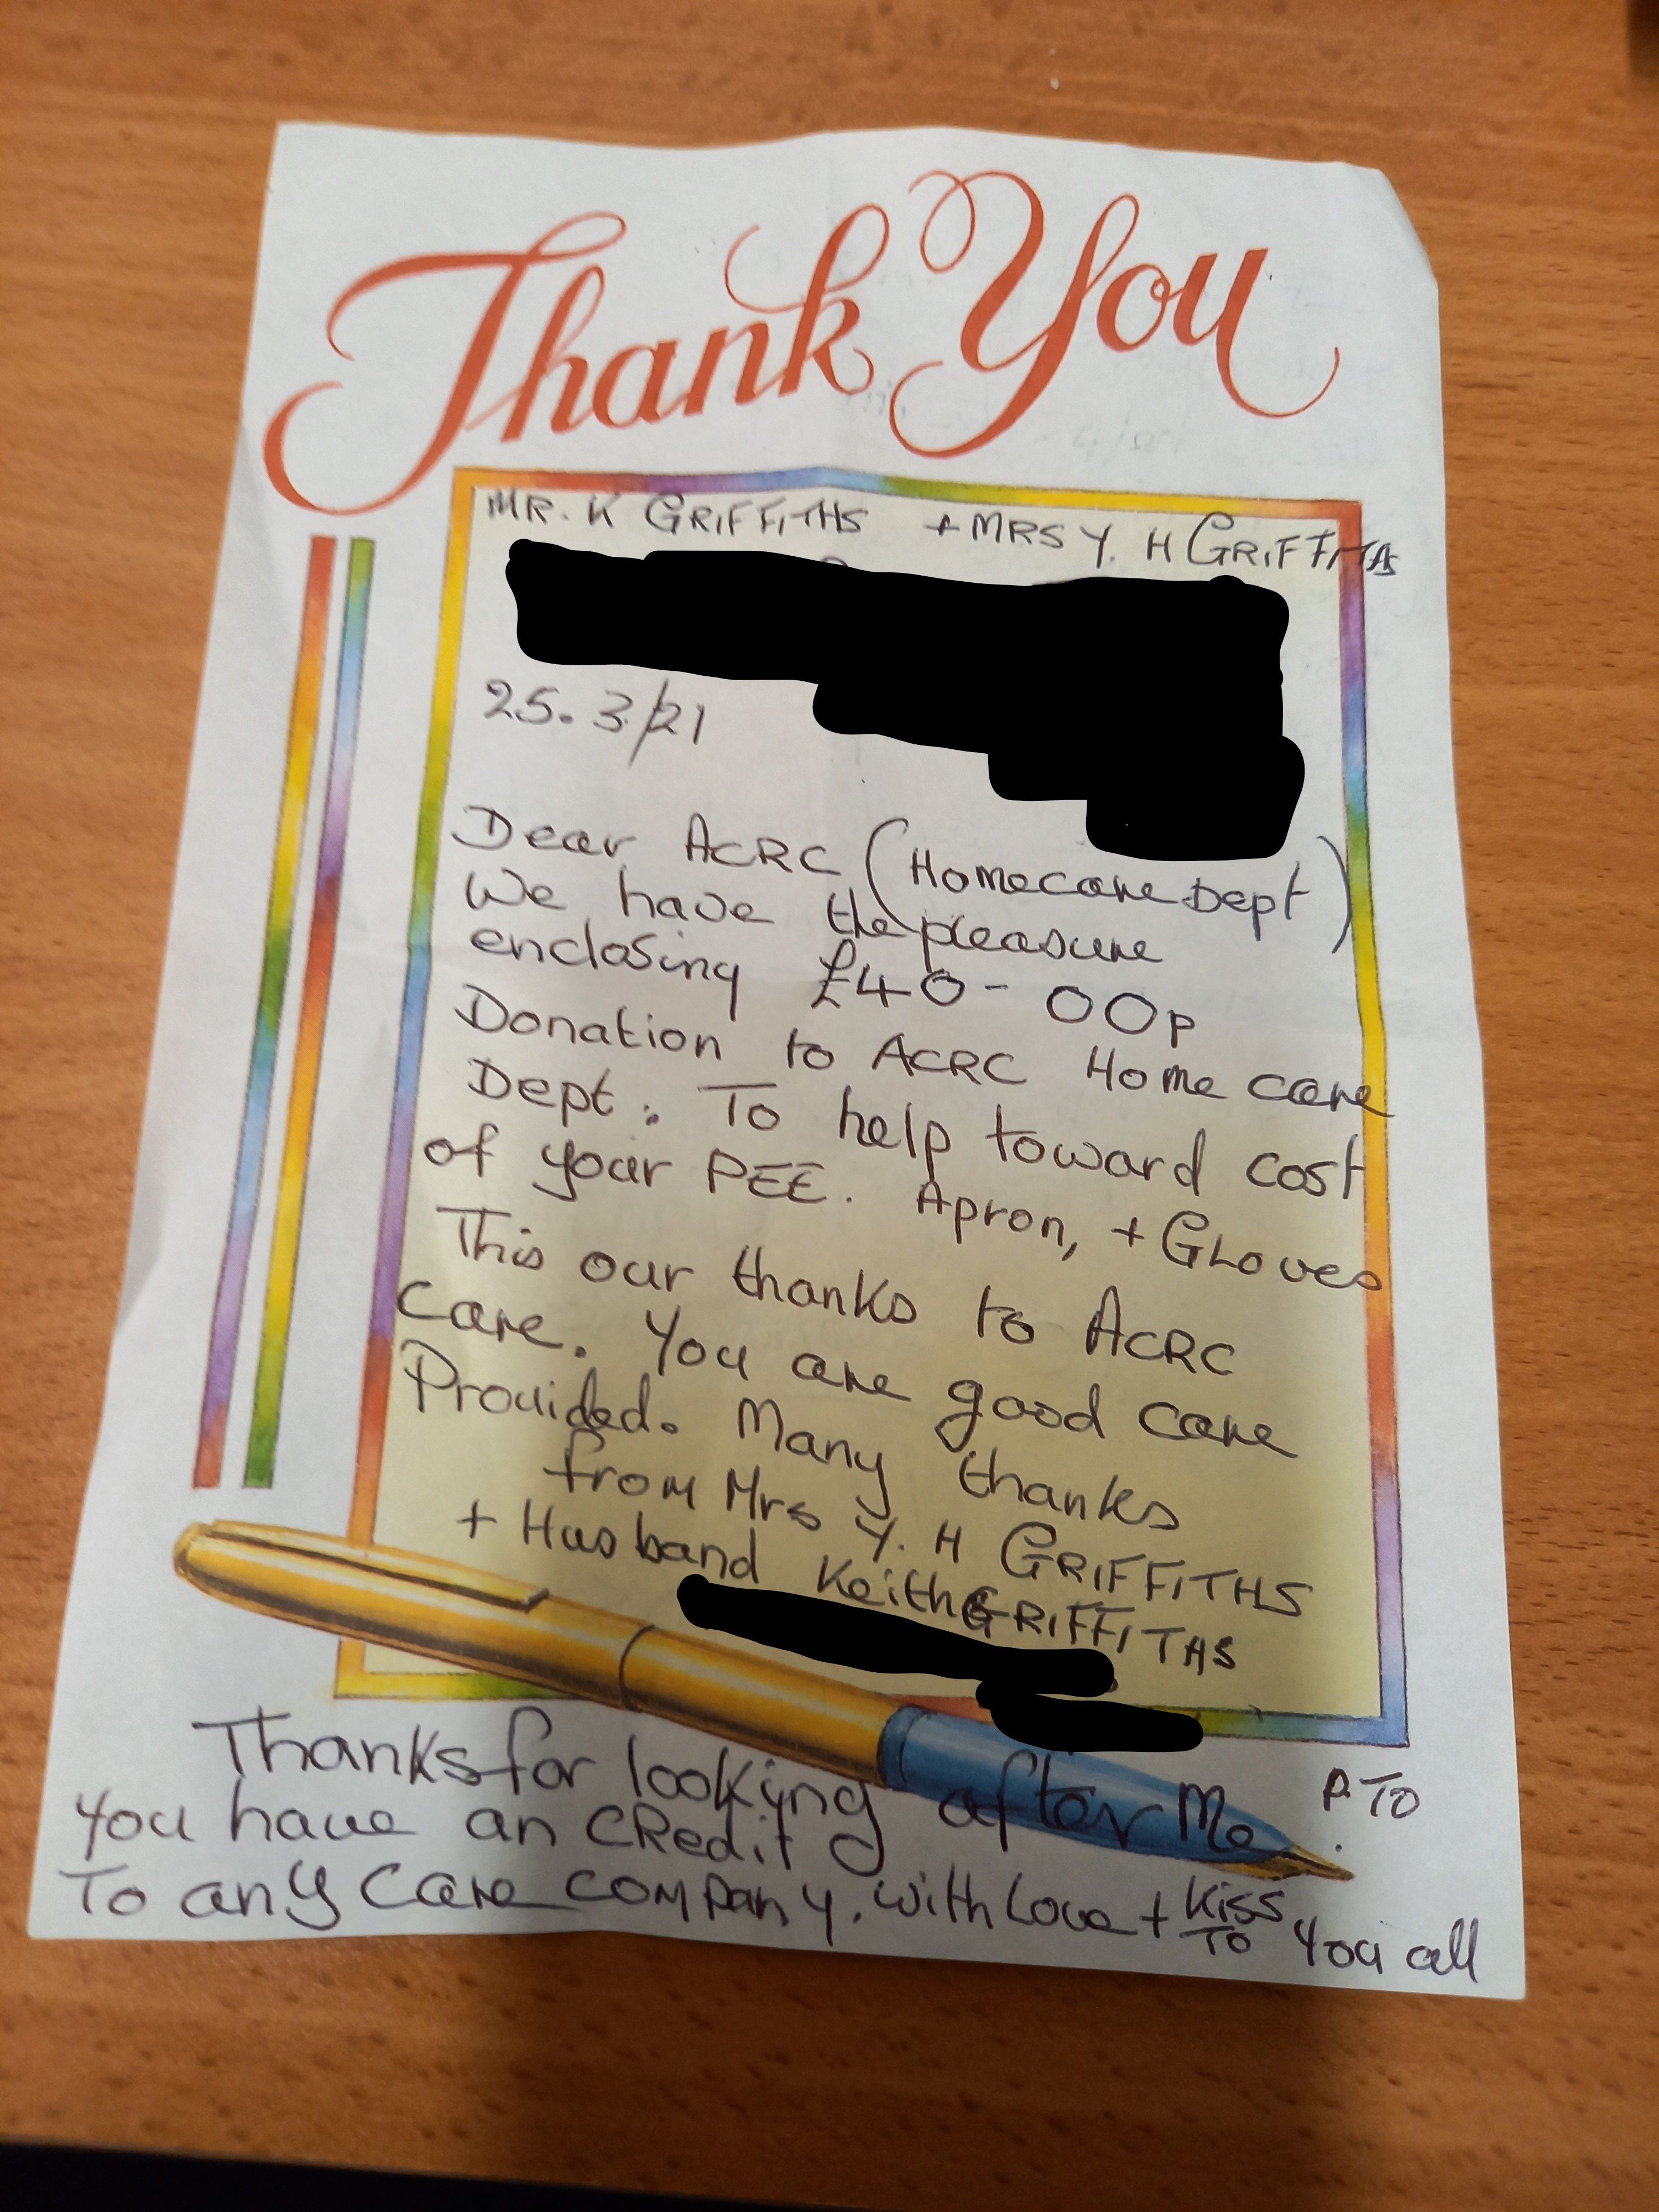 Thank You Donation Letter